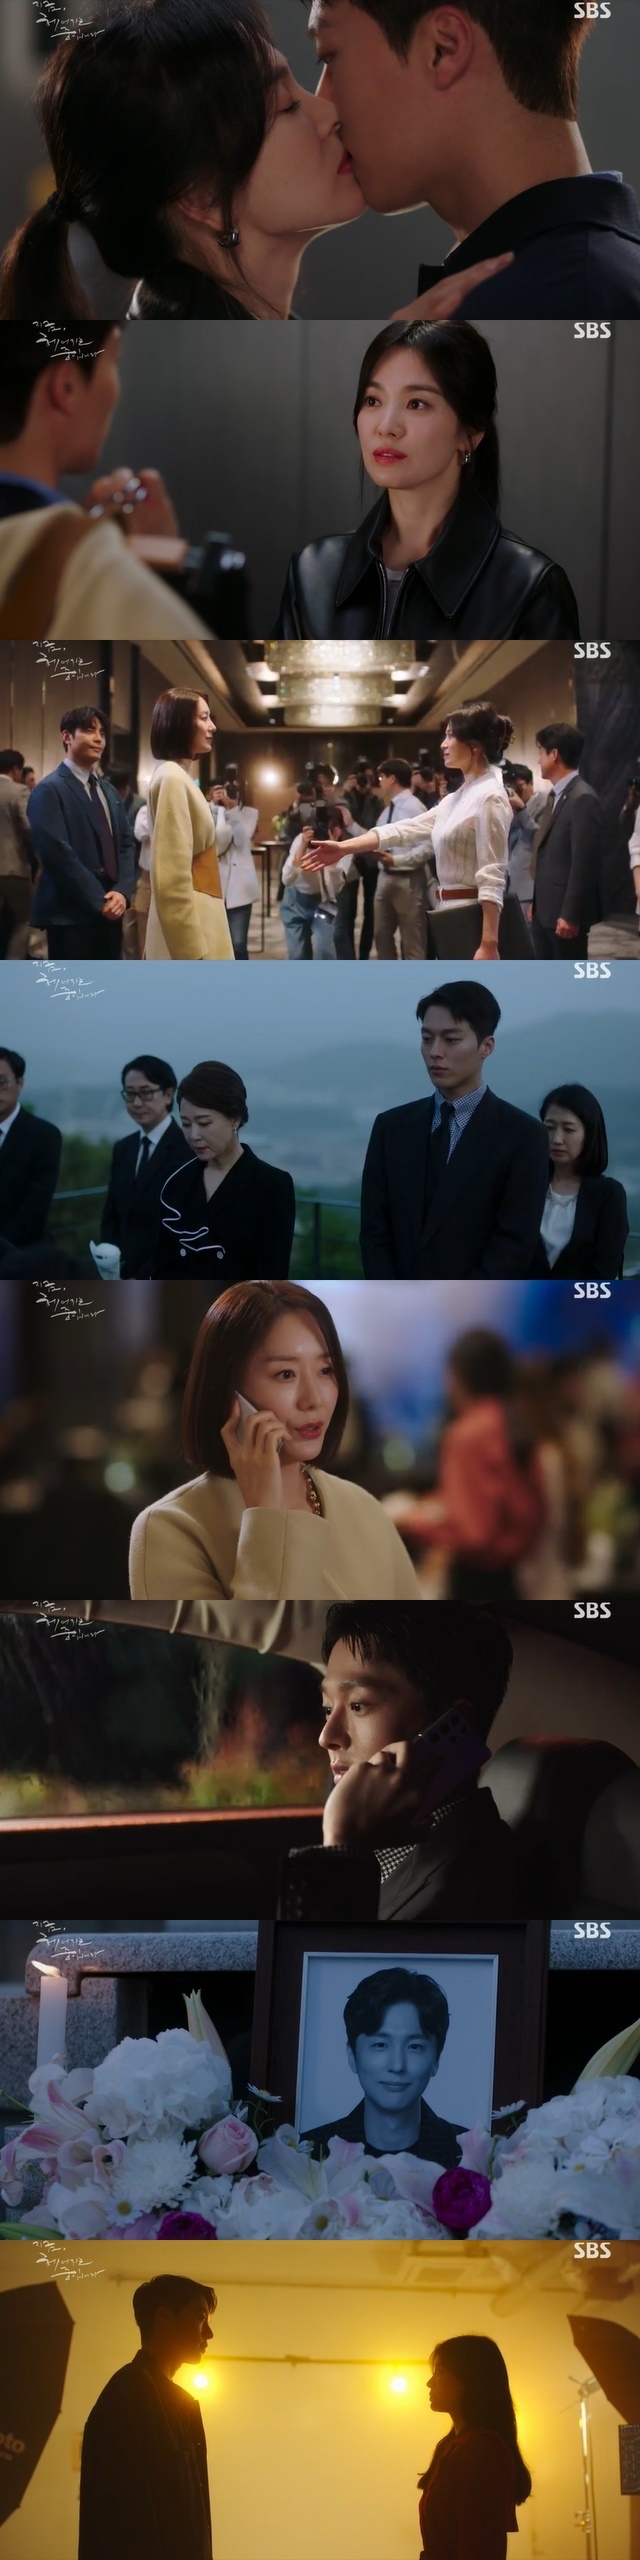 Song Hye-kyo and Jang Ki-yongs dead brothers relationship was revealed.In the second episode of SBSs Now, Im Breaking Up (playplayed by Jane, directed by Lee Gil-bok), which was broadcast on November 13, Ha Young-eun (Song Hye-kyo) and Yoon Jae-guk (Jang Ki-yong) were portrayed.On this day, Ha Young filled the 30th anniversary of The One, which was in Danger with his idea, with his idea.The womens Wannabe icon Seo Hye-lin (Yura Boon) was the main player and decided to invite influencers with more than 300,000 followers on average.Ha Yeong-eun prided himself on having at least 1.6 million promotional effects.Meanwhile, work with Seo Hye-lin didnt go any better than I thought: Seo Hye-lin tried to touch the already completed design and said, Honestly, who wears this domestic brand?I do not wear it unless the company has a contract. It is embarrassing. Ha Young-eun insults the brand Sono who devoted his life.Ha Young-eun nevertheless bowed his head as a team leader and offered a compromise with a luxury jewelery sponsorship that only three domestic points came in, but Seo Hye-lin insisted on unconditional clothes modification.Ha Young-eun entered into a different celeb service with the idea that he could not modify his clothes.Ha Young-eun then recalled another influenza, Shin Yoo-jung (played by Yoon Jung-hee), who is the only daughter of the Hills Group and boasts 600,000 Followers. Ha Young-eun tried to contact Shin Yoo-jung, although it was not easy.While struggling with Danger, Ha Young and Yoon Jae-guk got a little closer.Ha Young-eun said, Yoon Jae-guk will continue to reveal his mind, but it may be a long time ago, but not now.The hormones responded, but the movie that knows the ending is not funny.Yoon Jae-guk revealed that he was leaving for Paris tomorrow and asked, Can you be honest with me once? I will not see you again now or again.Ha Young-eun kissed Yoon Jae-guk first, but Ha Young-eun took a step away from Yoon Jae-guk, who is coming to kiss him more properly.The answer I can do is this far. Yoon Jae-guk, who was sadly separated from Ha Young-eun, called his acquaintance Shin Yoo-jung and asked, Can you do me a favor?Shin Yoo-jung, who appeared at the 30th anniversary celebration, made Yoon Jae-kook guess what kind of request he had made to Shin Yoo-jung.Shin Yoo-jung sat at the venue and watched the subject of Yoon Jae-guks attention.Then Shin Yu-jung called Yoon Jae-guk, who was heading to the airport to return to France after finding his brother Yoon Soo-wans grave. Shin Yu-jung said, Do you not know who Ha-young is?Yoon Jae-guk and Ha Young indirectly revealed that there is a relationship between them.